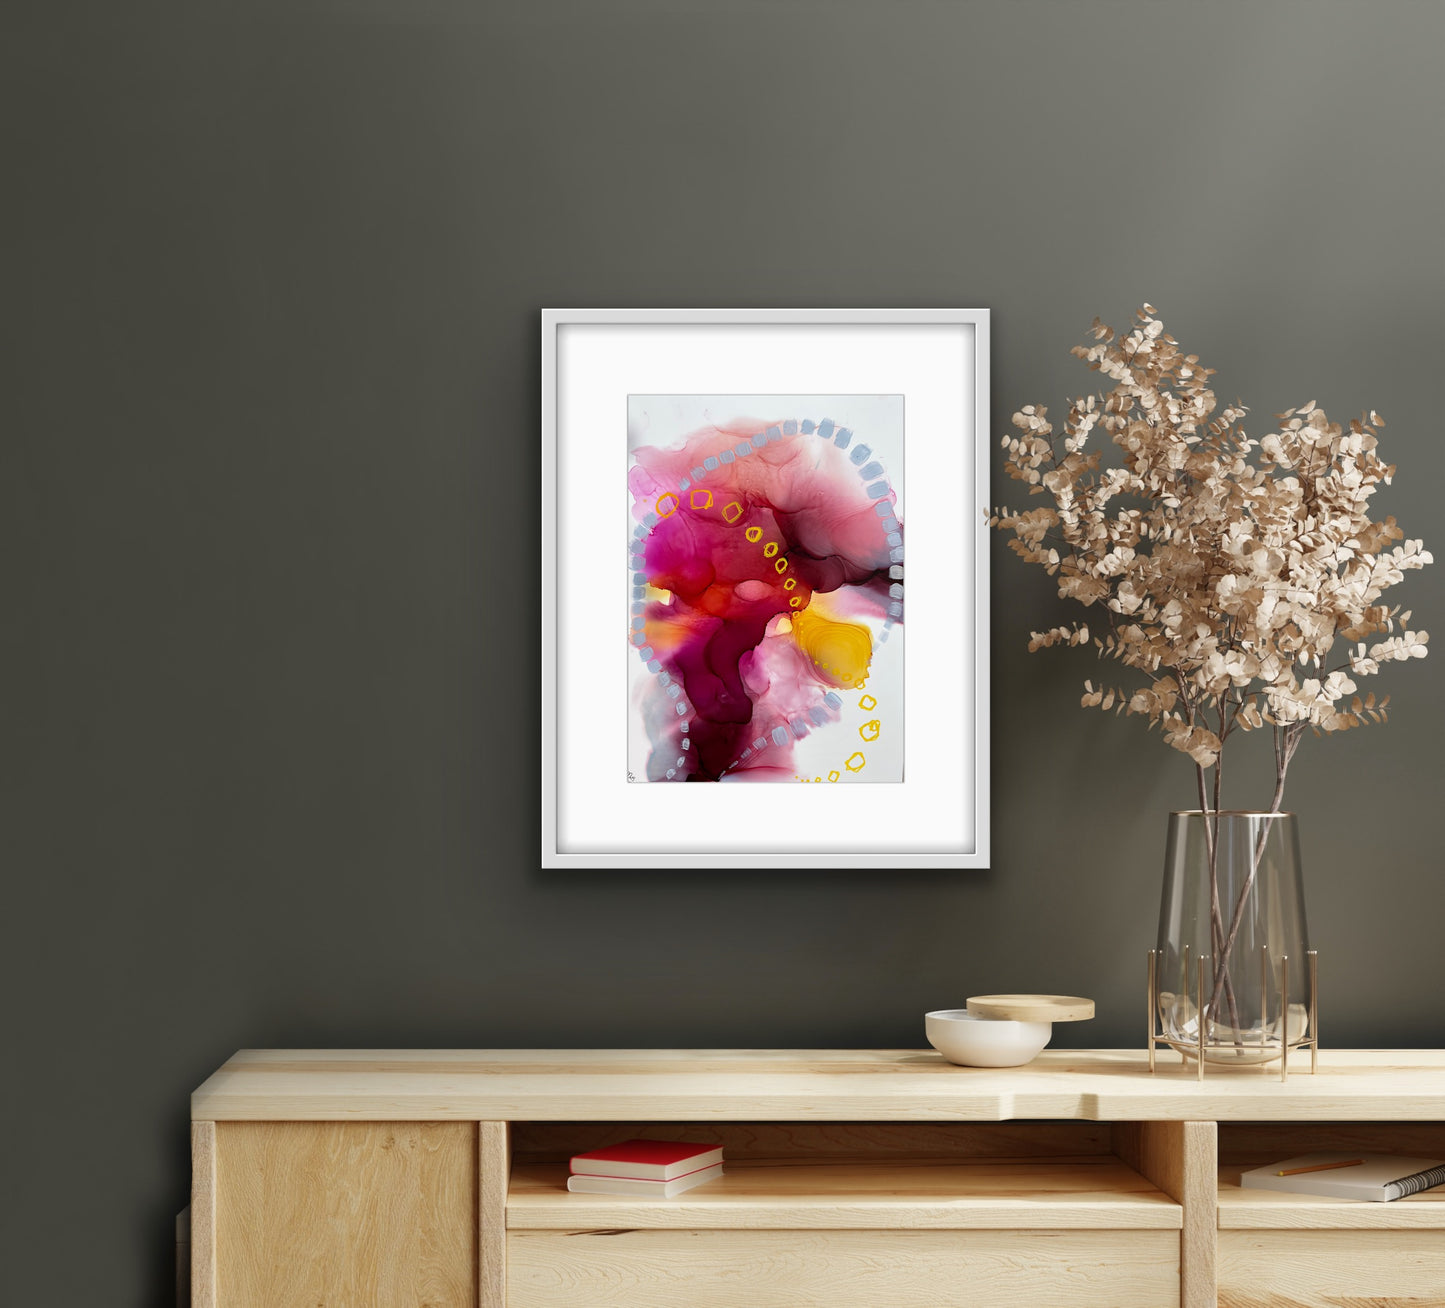 On a pink cloud - original abstract painting in red, pink and yellow.